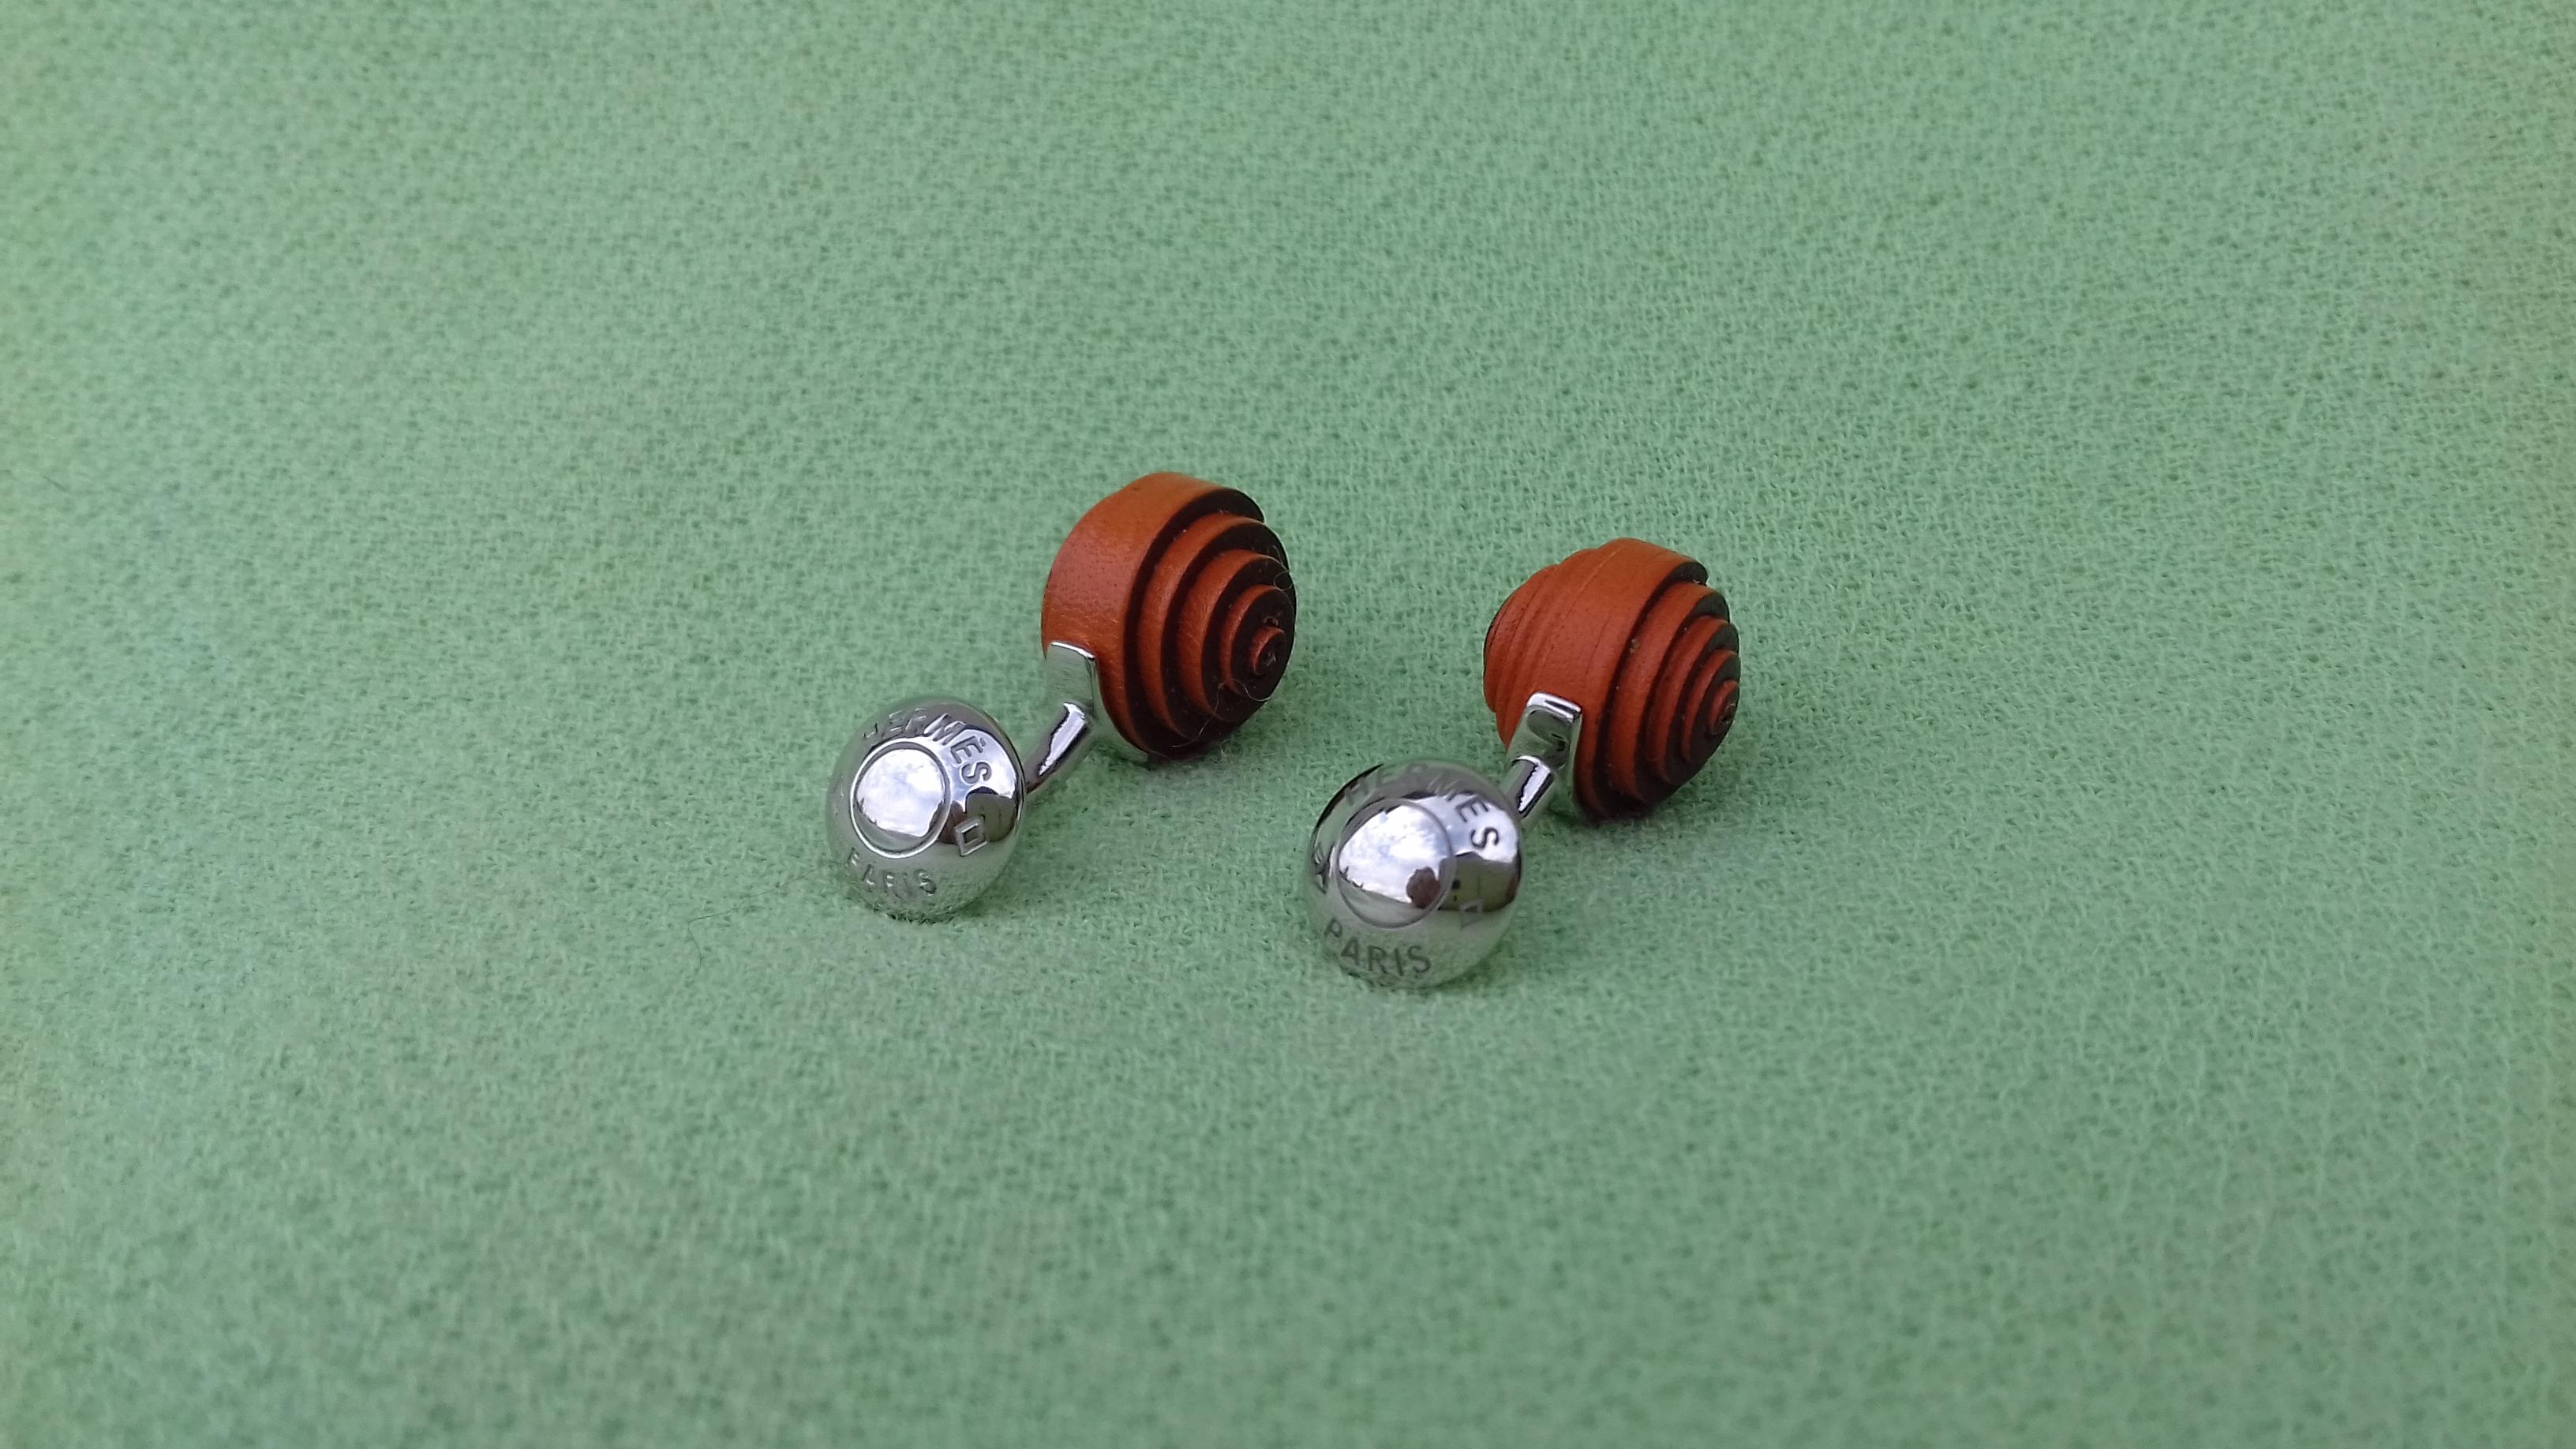 Hermès Coiled Leather and Sterling Silver Cuffs Button Snail Shaped Cufflinks  1